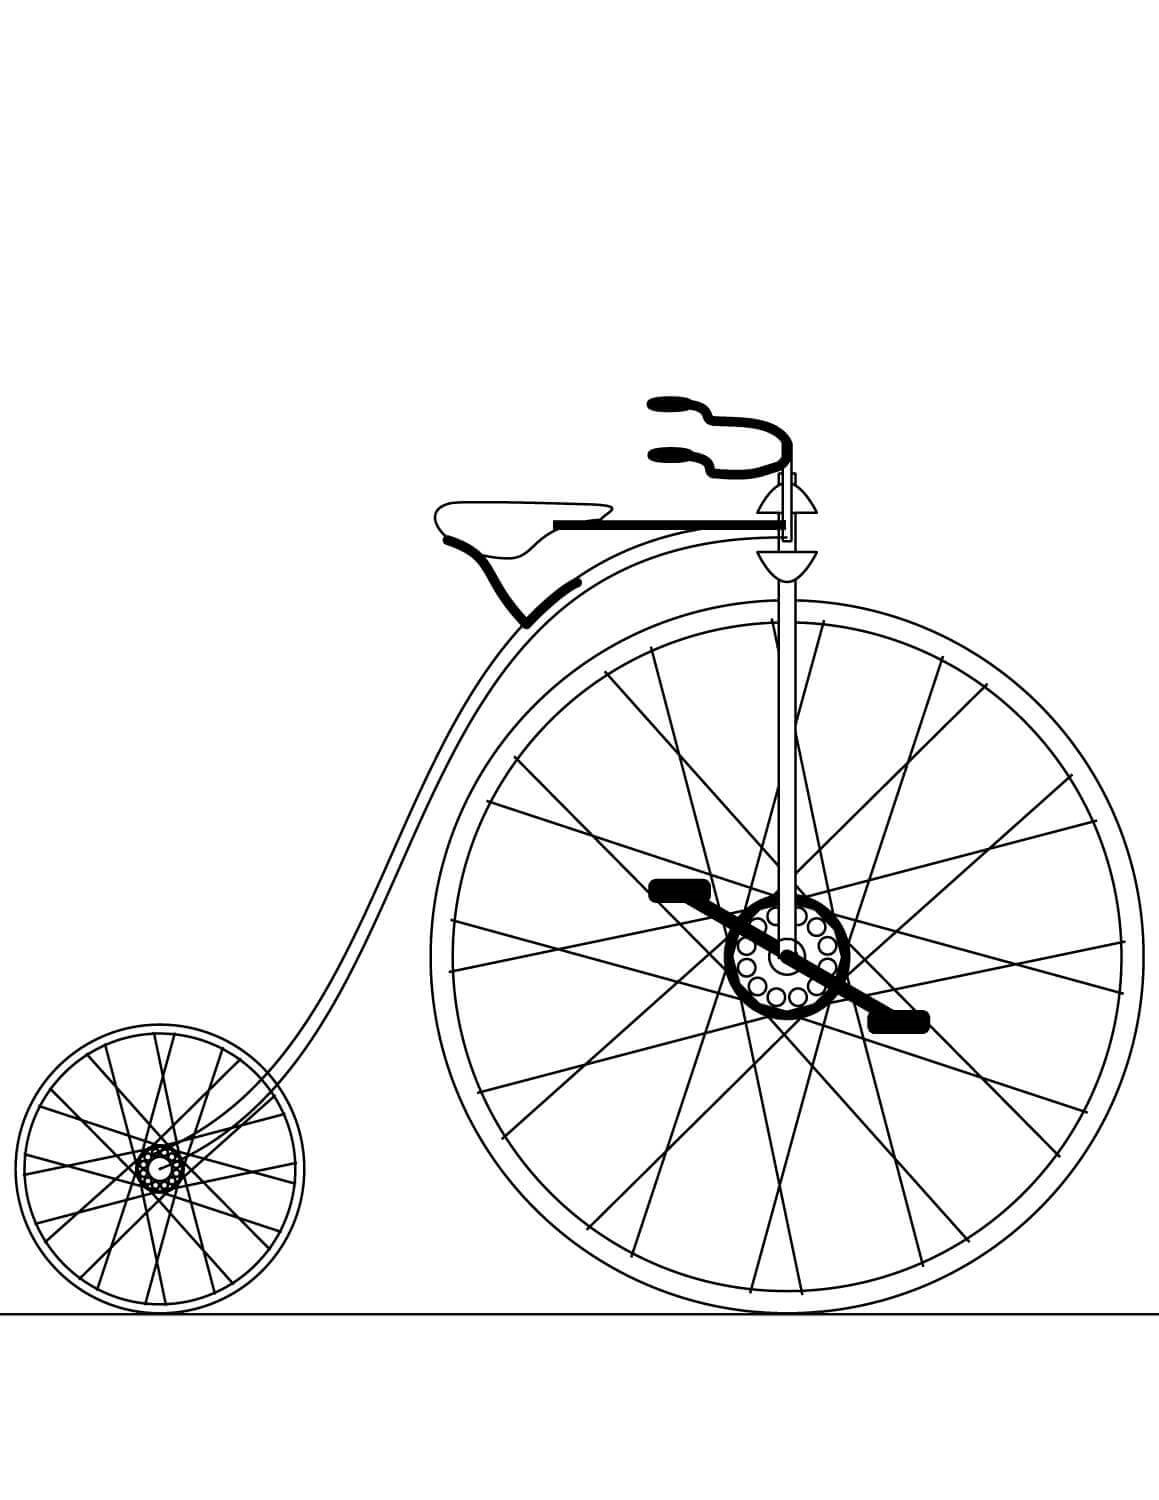 Old Velocipede Online Coloring Page